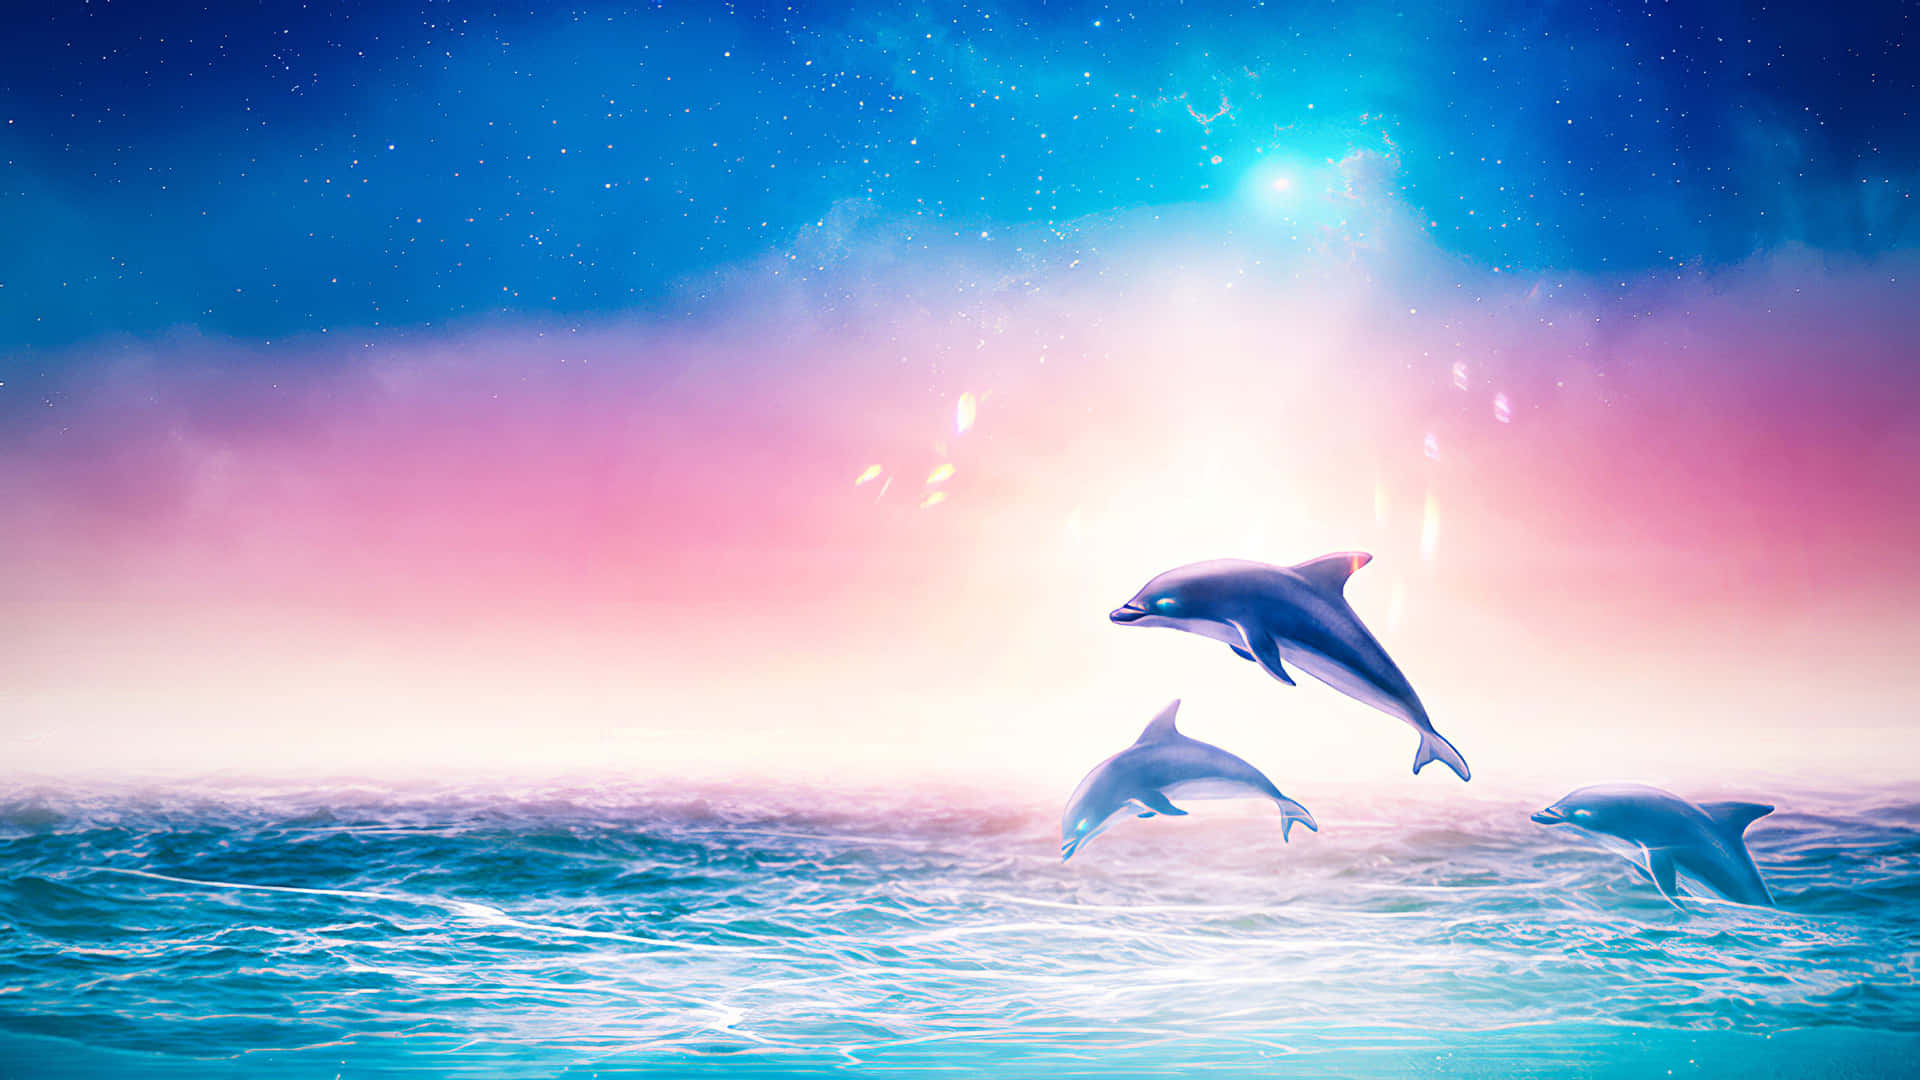 A colorful pink dolphin making a splash in the ocean Wallpaper